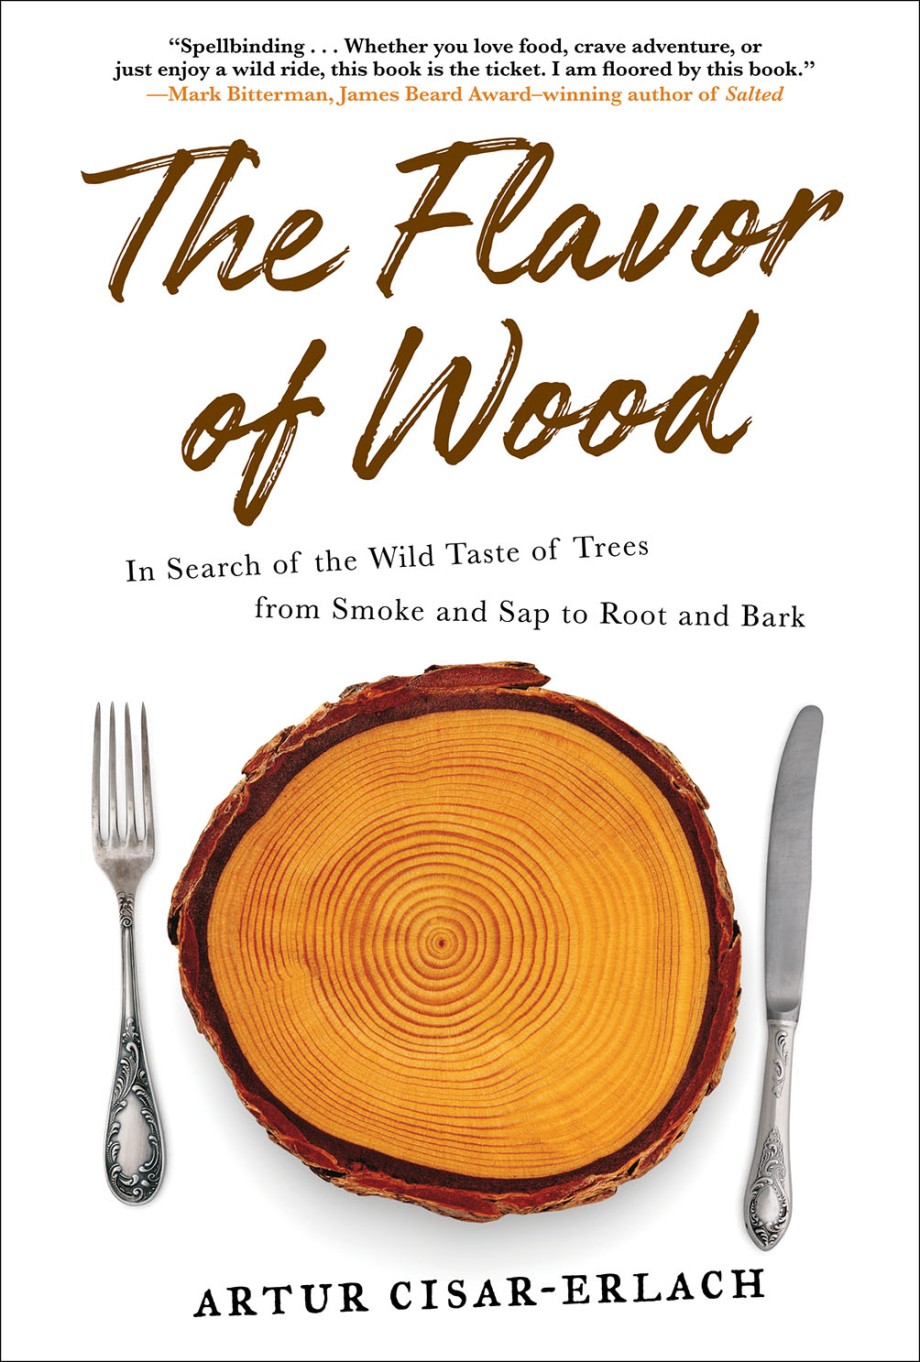 Flavor of Wood In Search of the Wild Taste of Trees from Smoke and Sap to Root and Bark